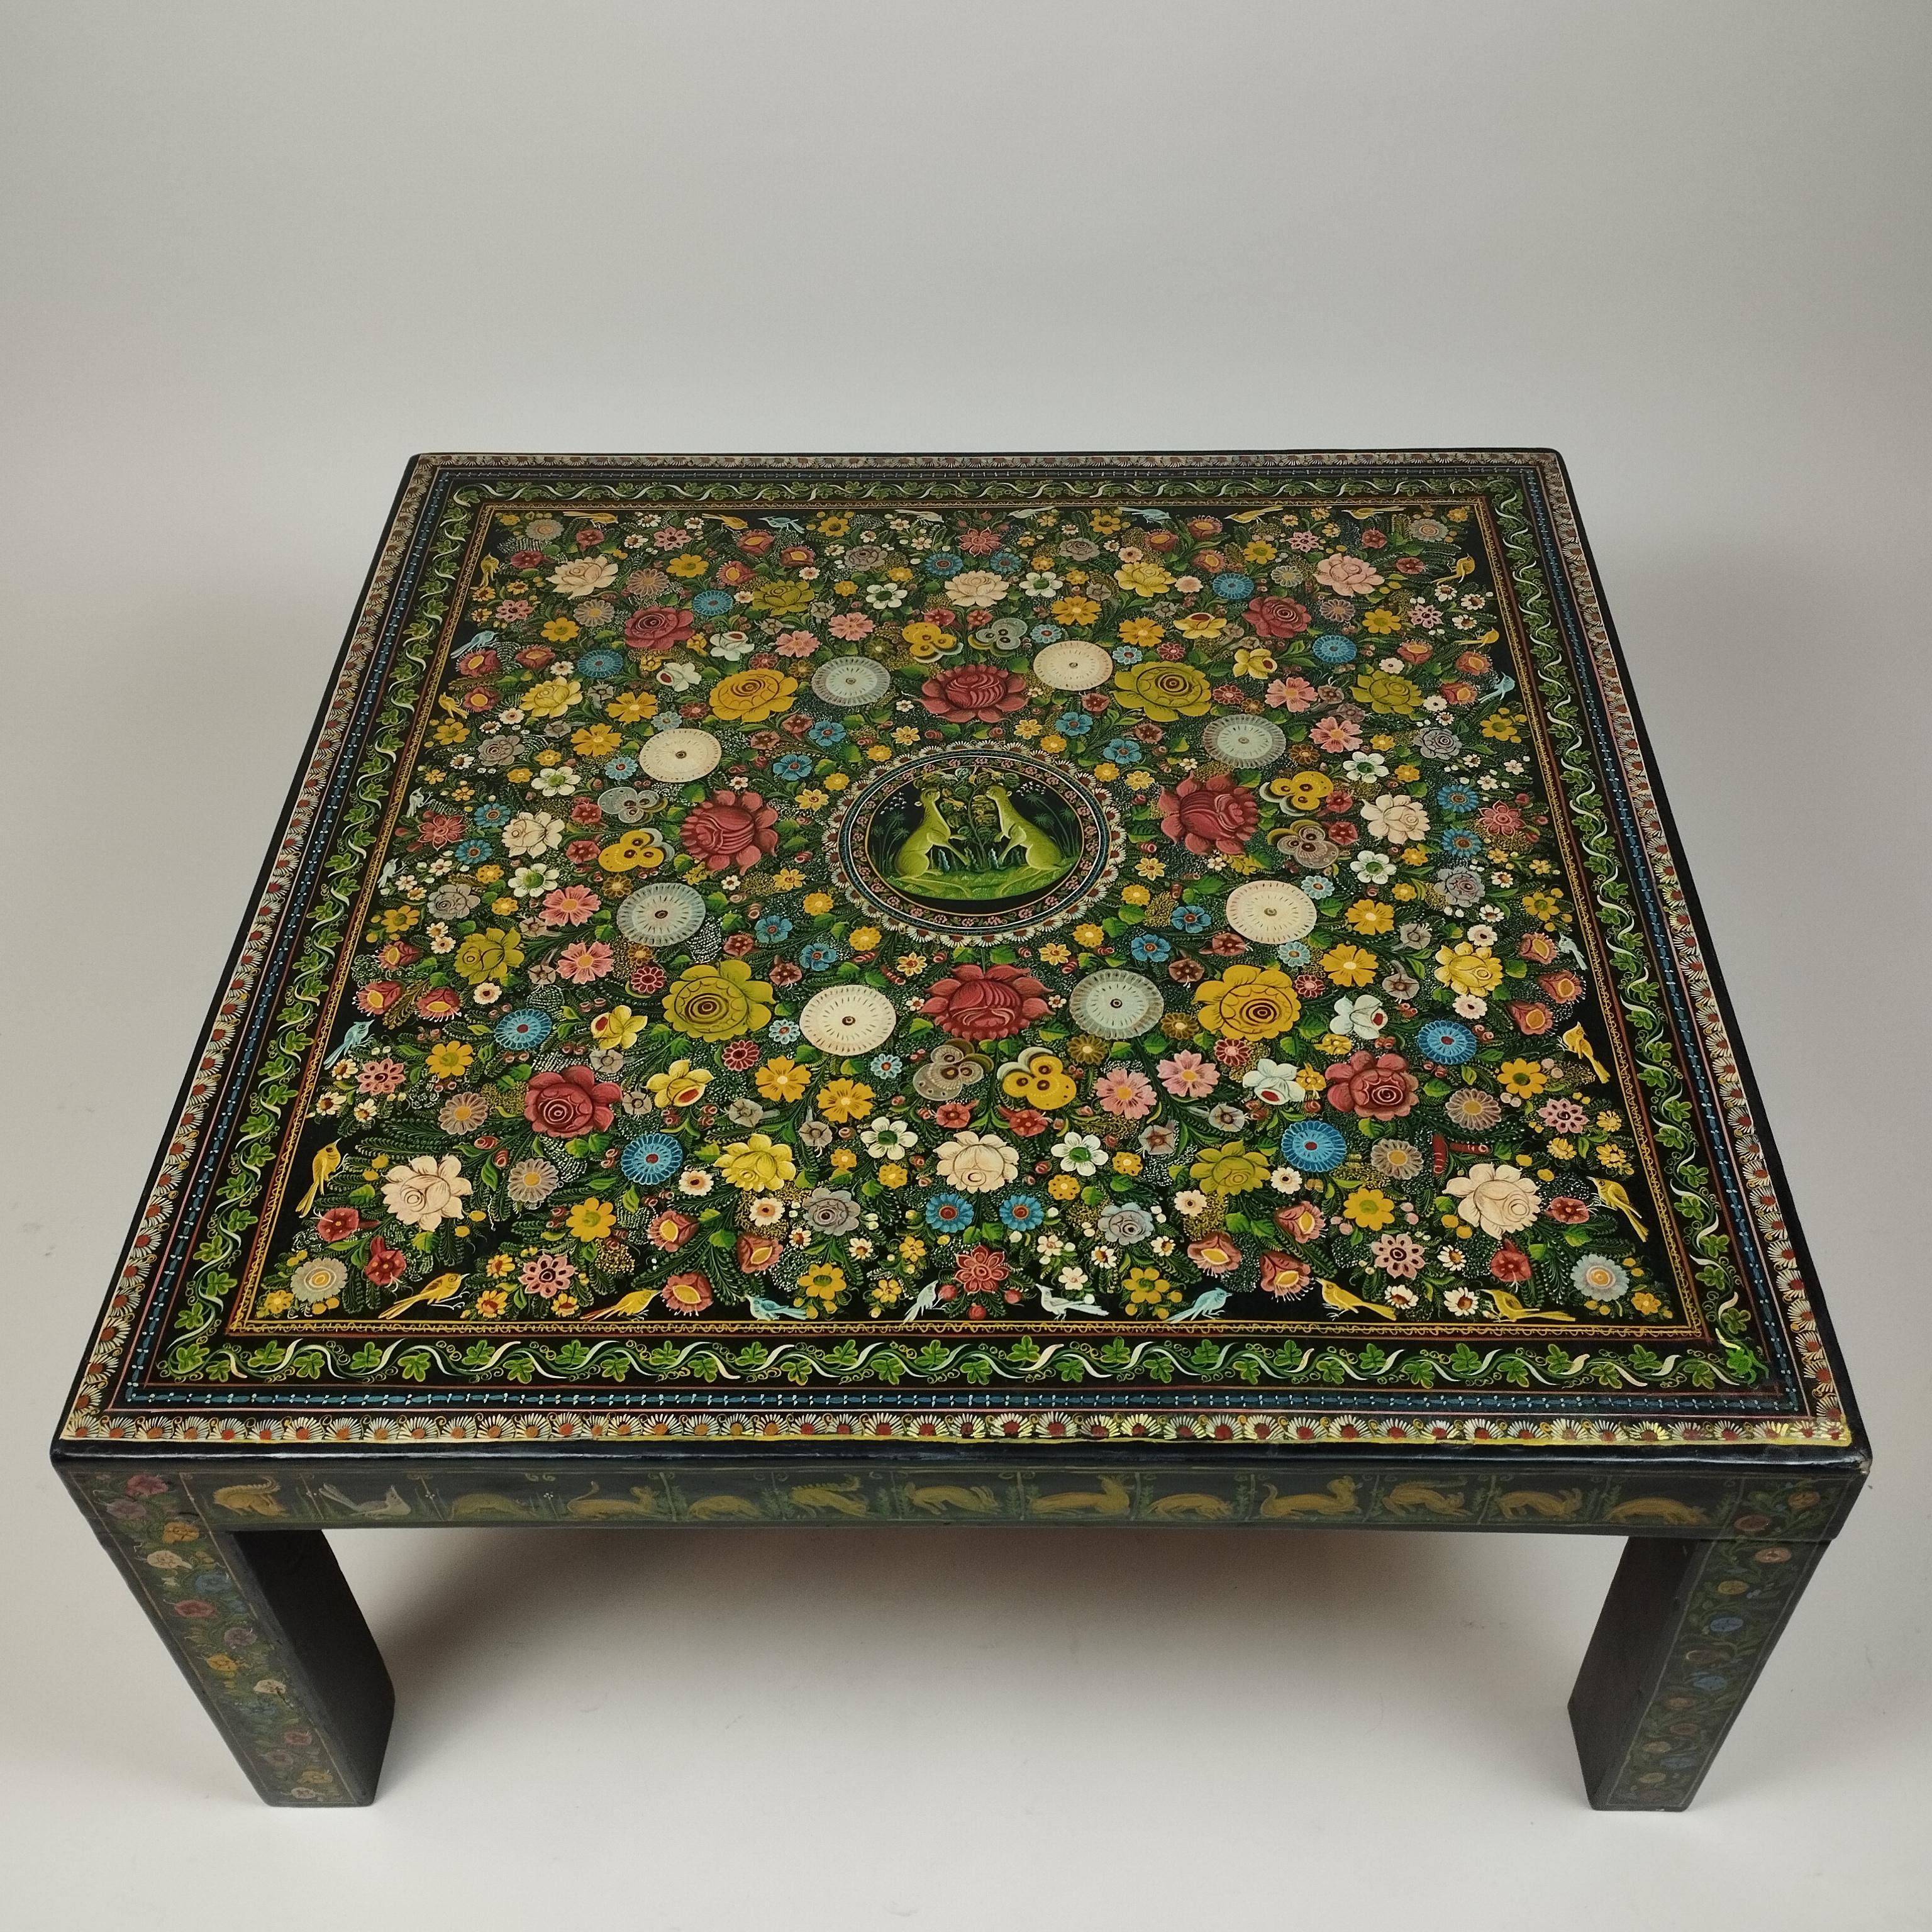 A ca. 1950s Mexican folk art coffee table from Olinalá, Guerrero. The wood structure is covered by hand-painted lacquer decoration depicting flowers and animals on a black background. 

Olinalá, Guerrero is a city in south-west Mexico known by